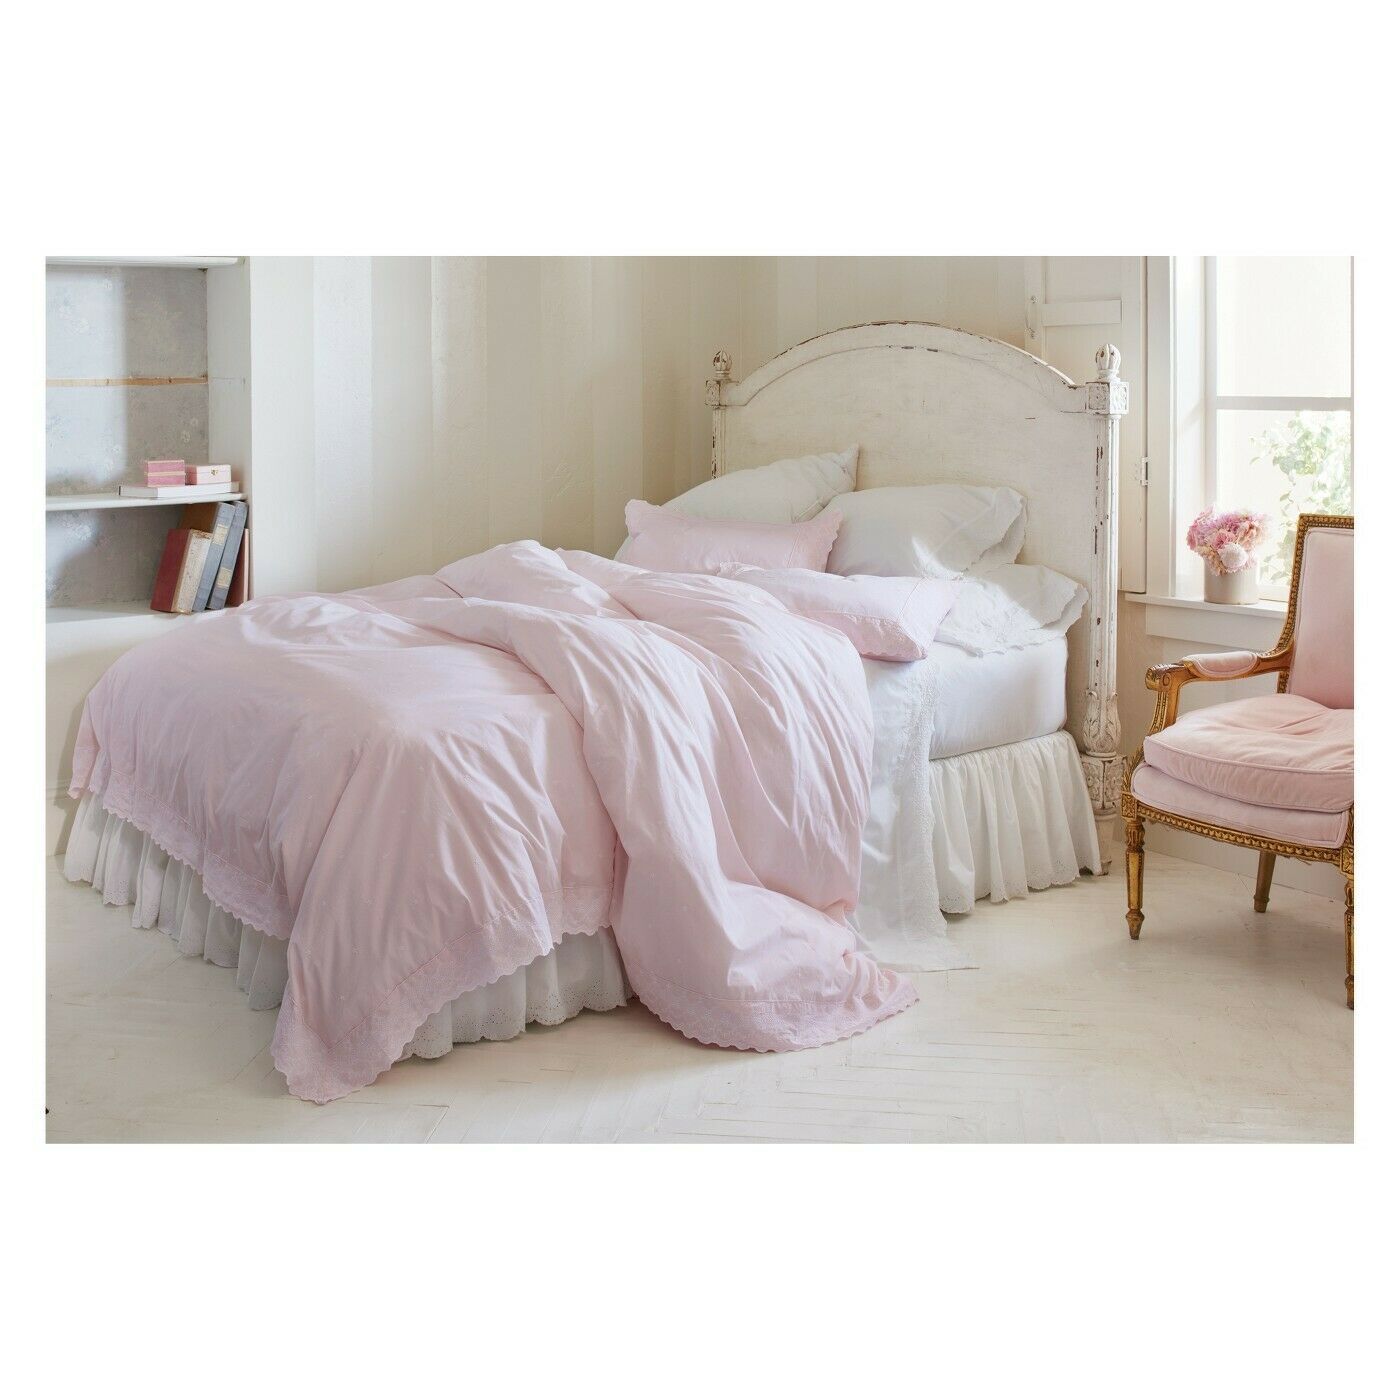 Simply Shabby Chic Duvet 1 Customer Review And 24 Listings